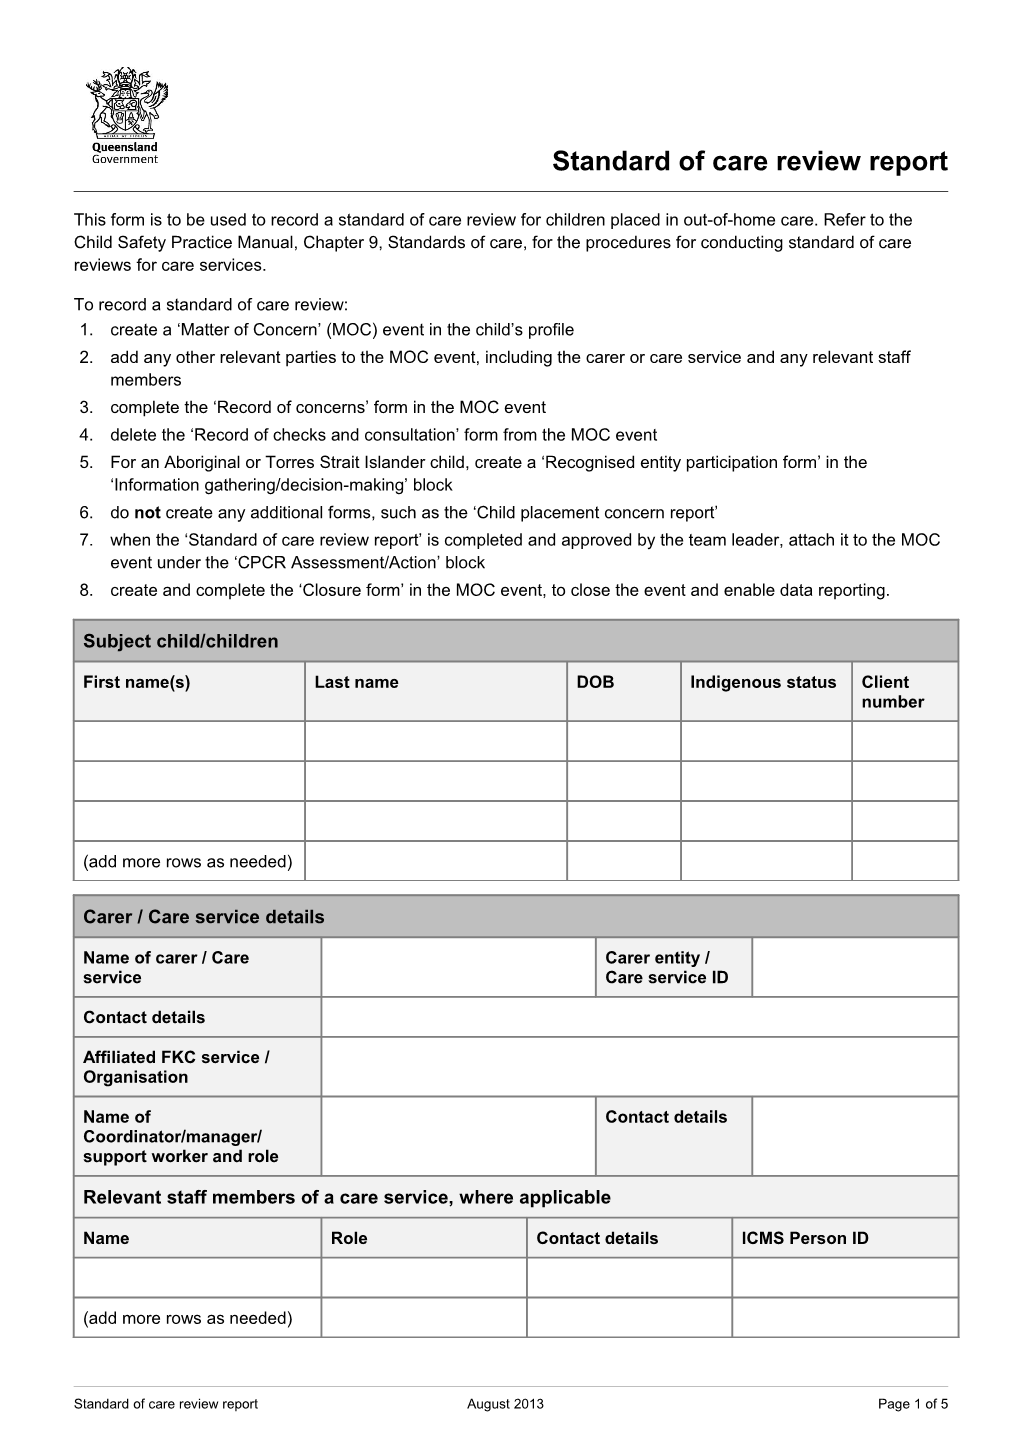 Standard of Care Review Report